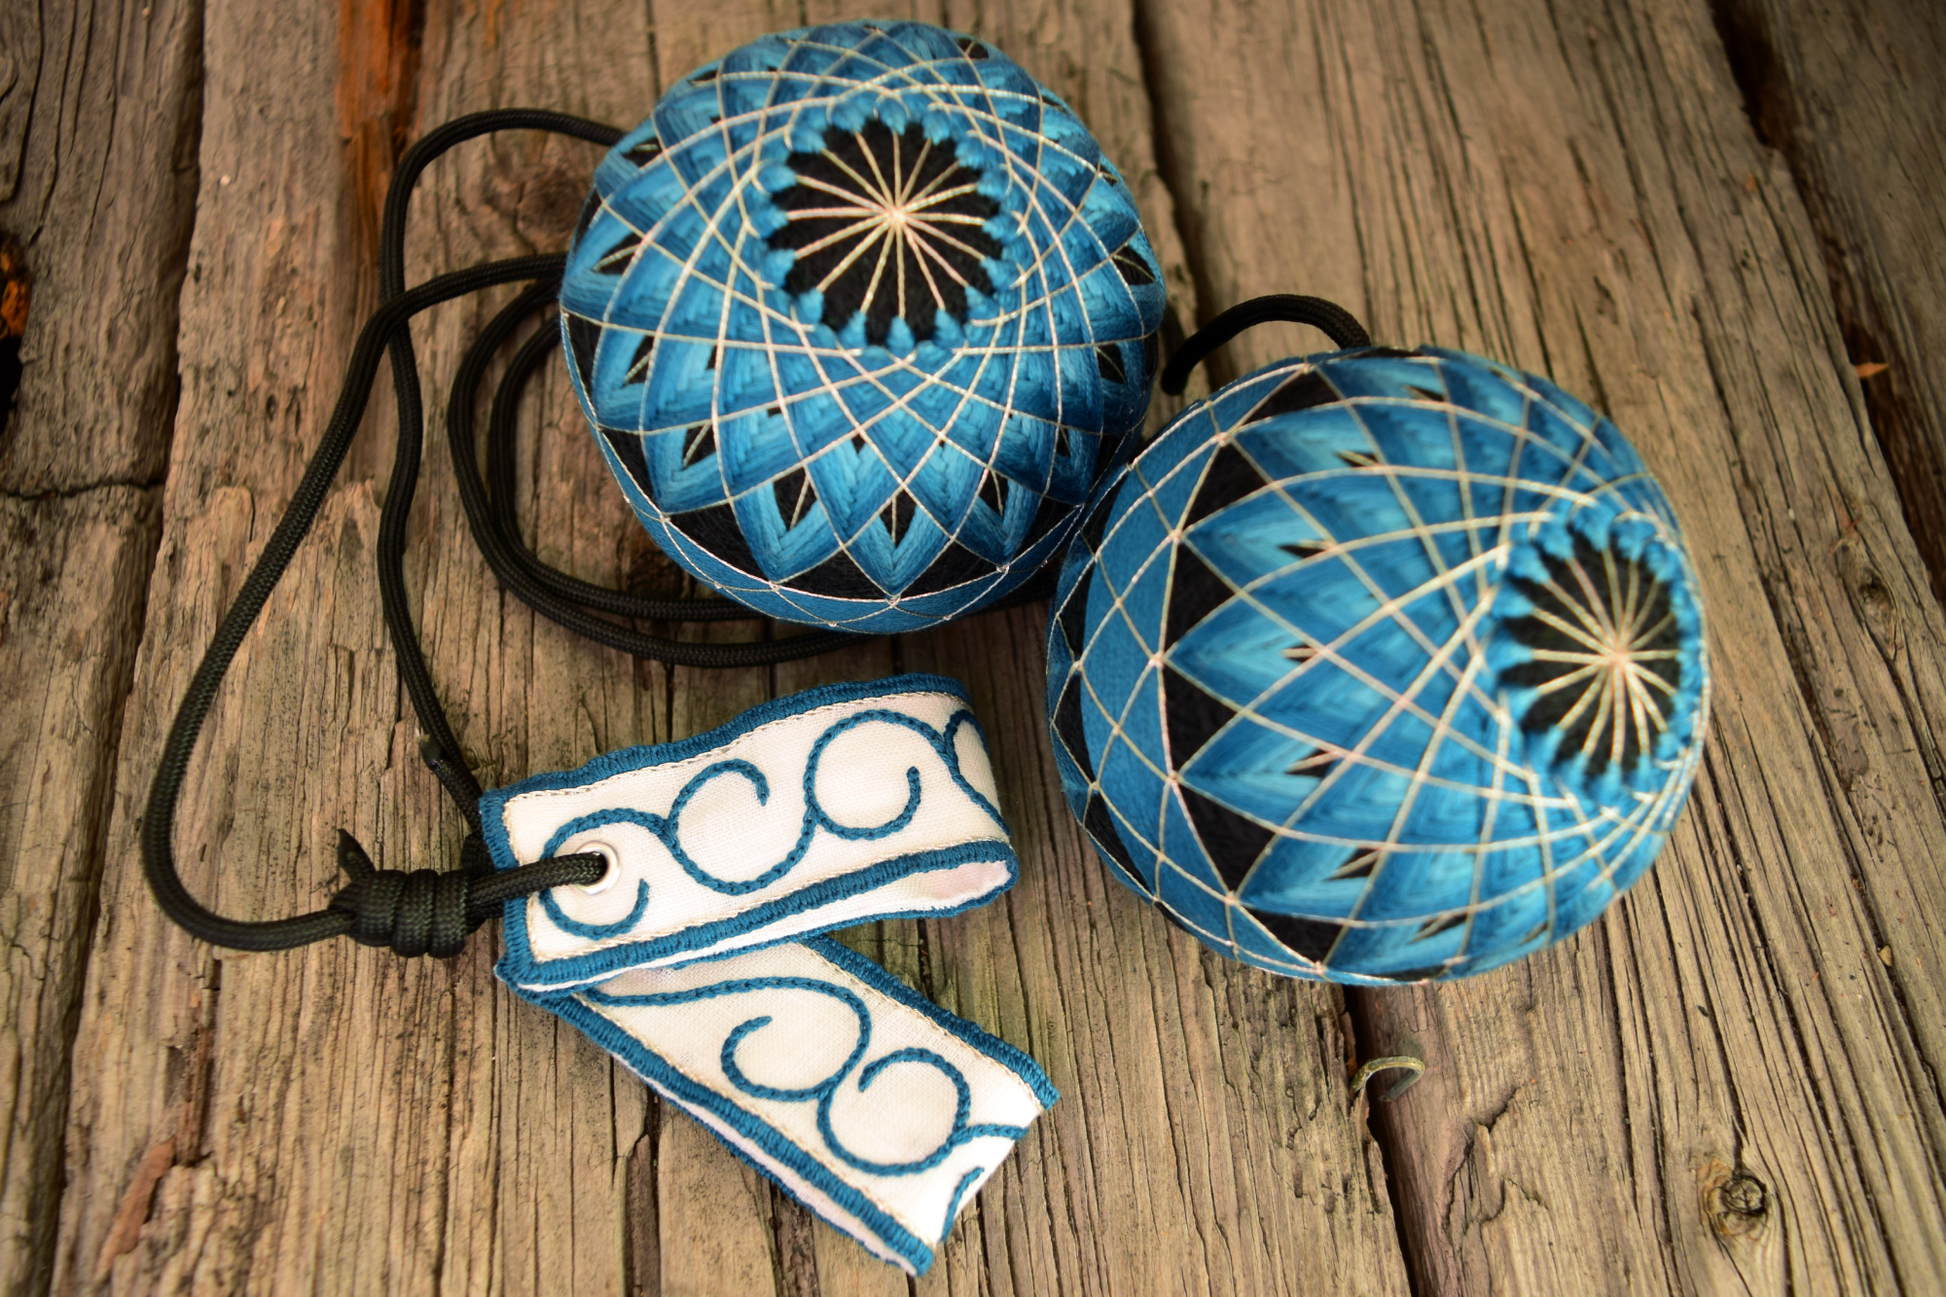 Hand embroidered temari poi in teal and black with swirl handles